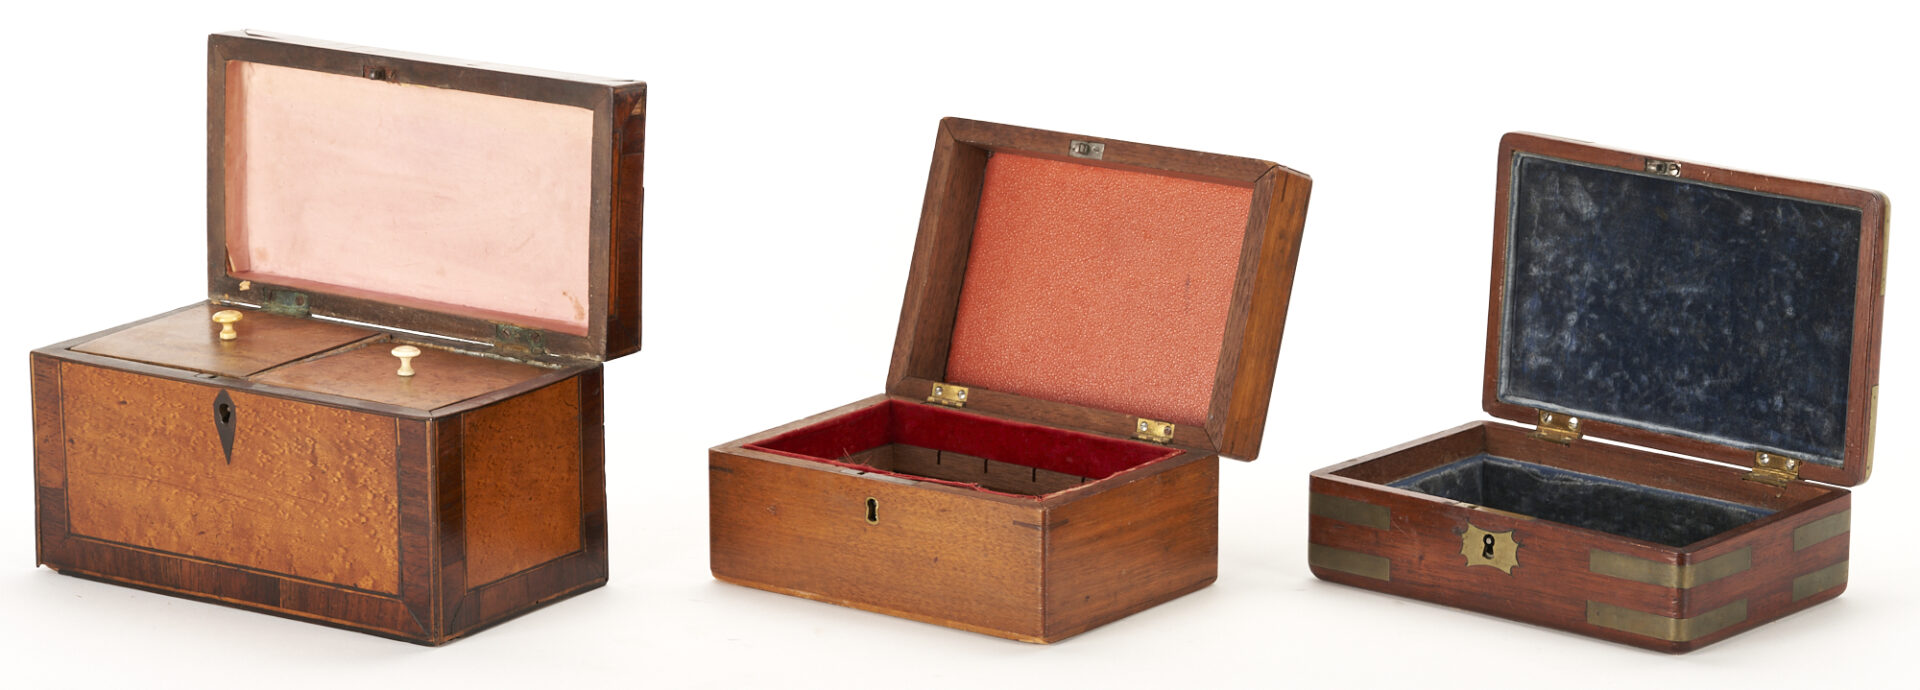 Lot 252: 6 Continental Wooden Boxes incl. Lap Desk with Stand, Tea Caddy